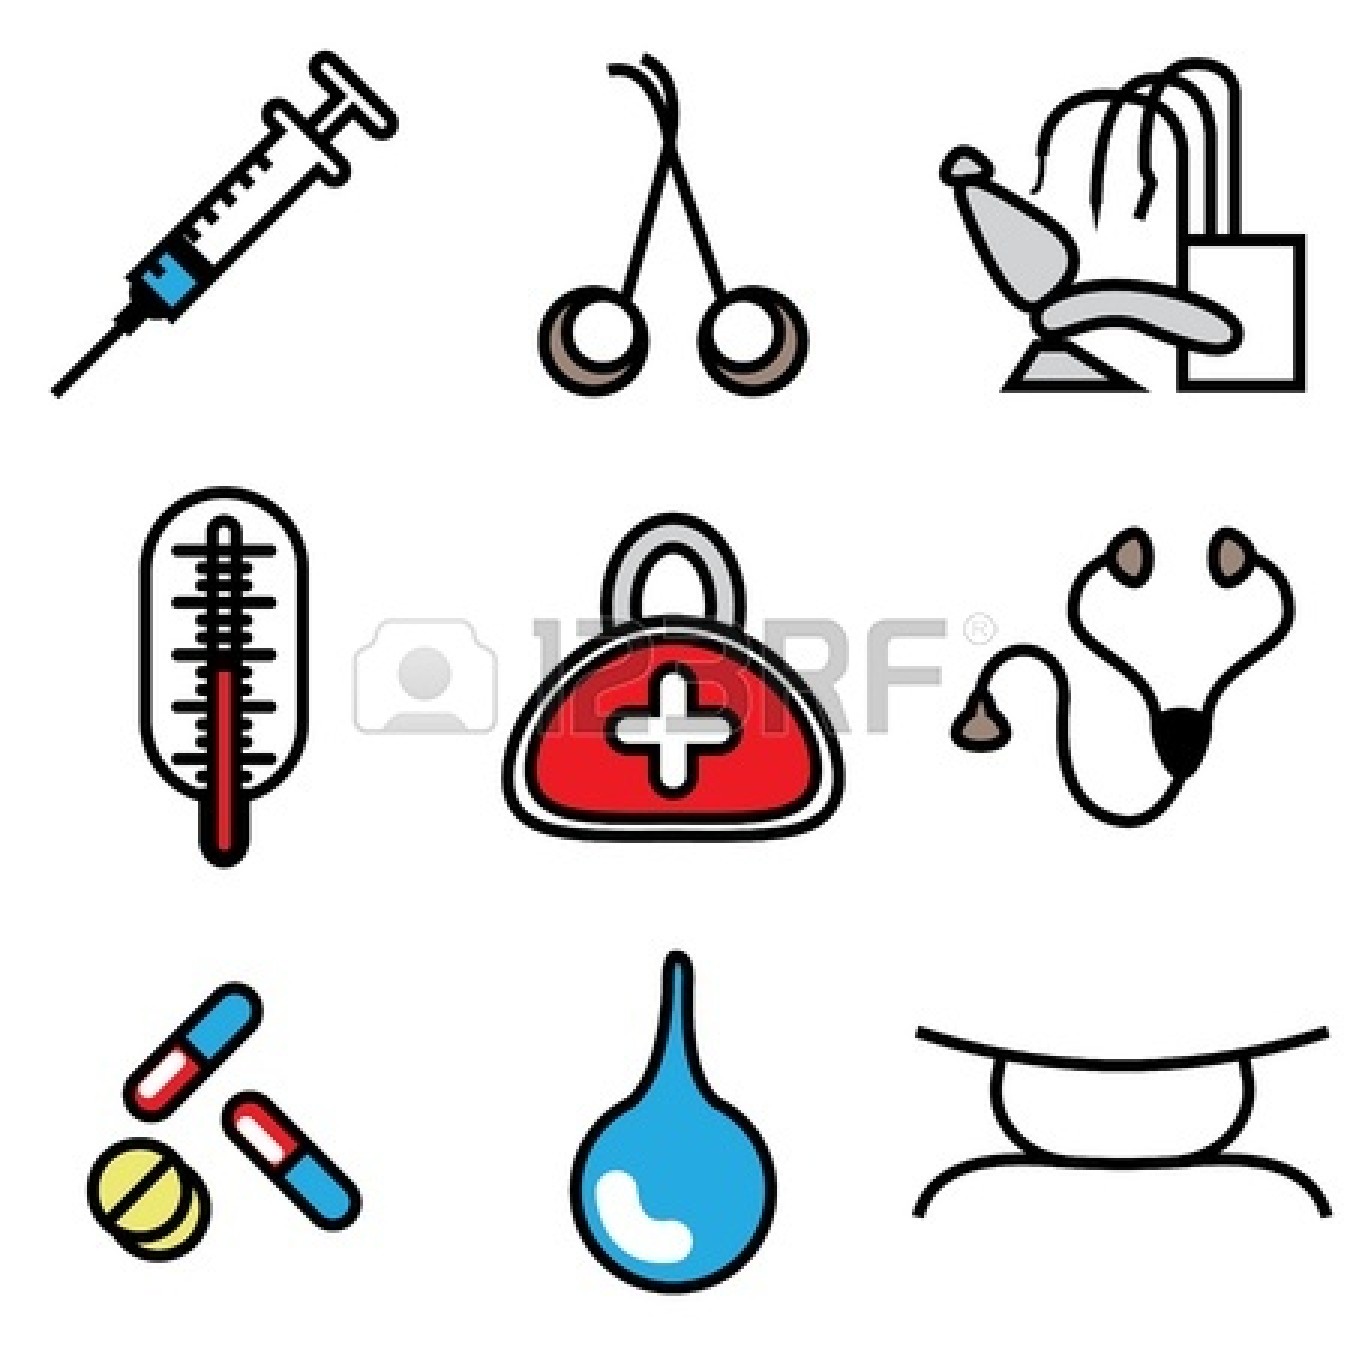 Doctor Tools Clipart   Clipart Panda   Free Clipart Images